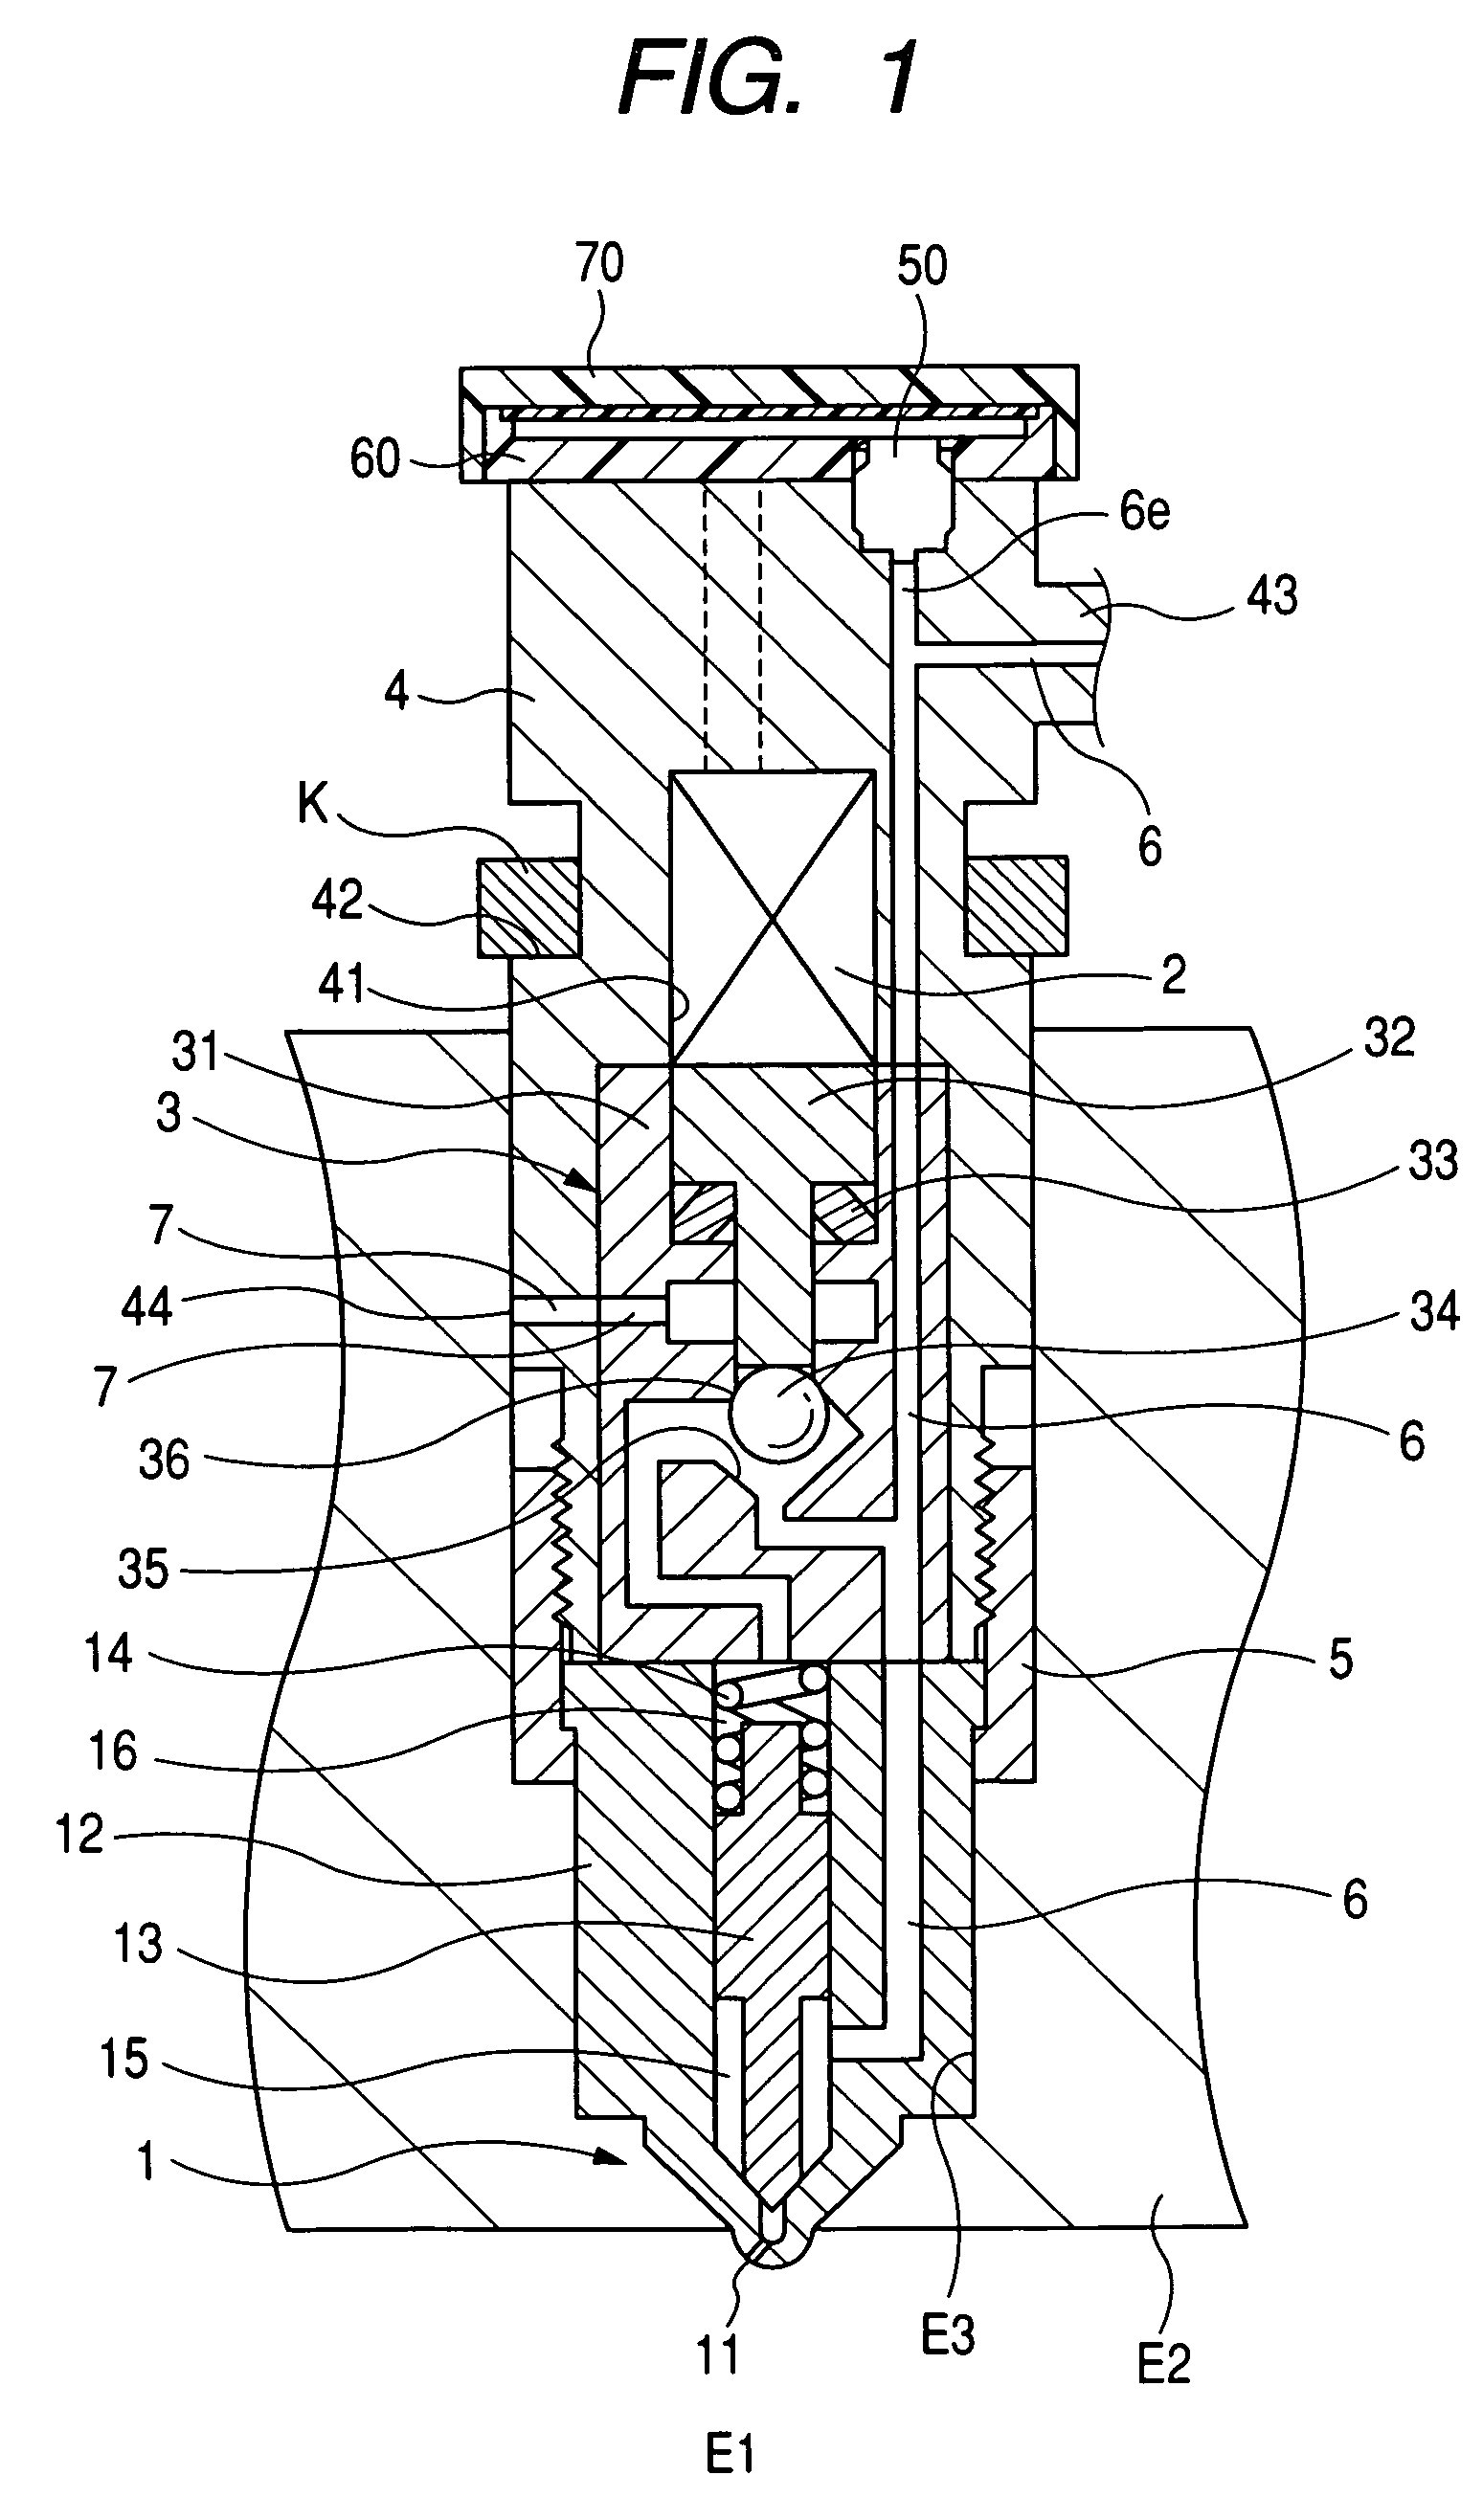 Fuel injector designed to minimize mechanical stress on fuel pressure sensor installed therein